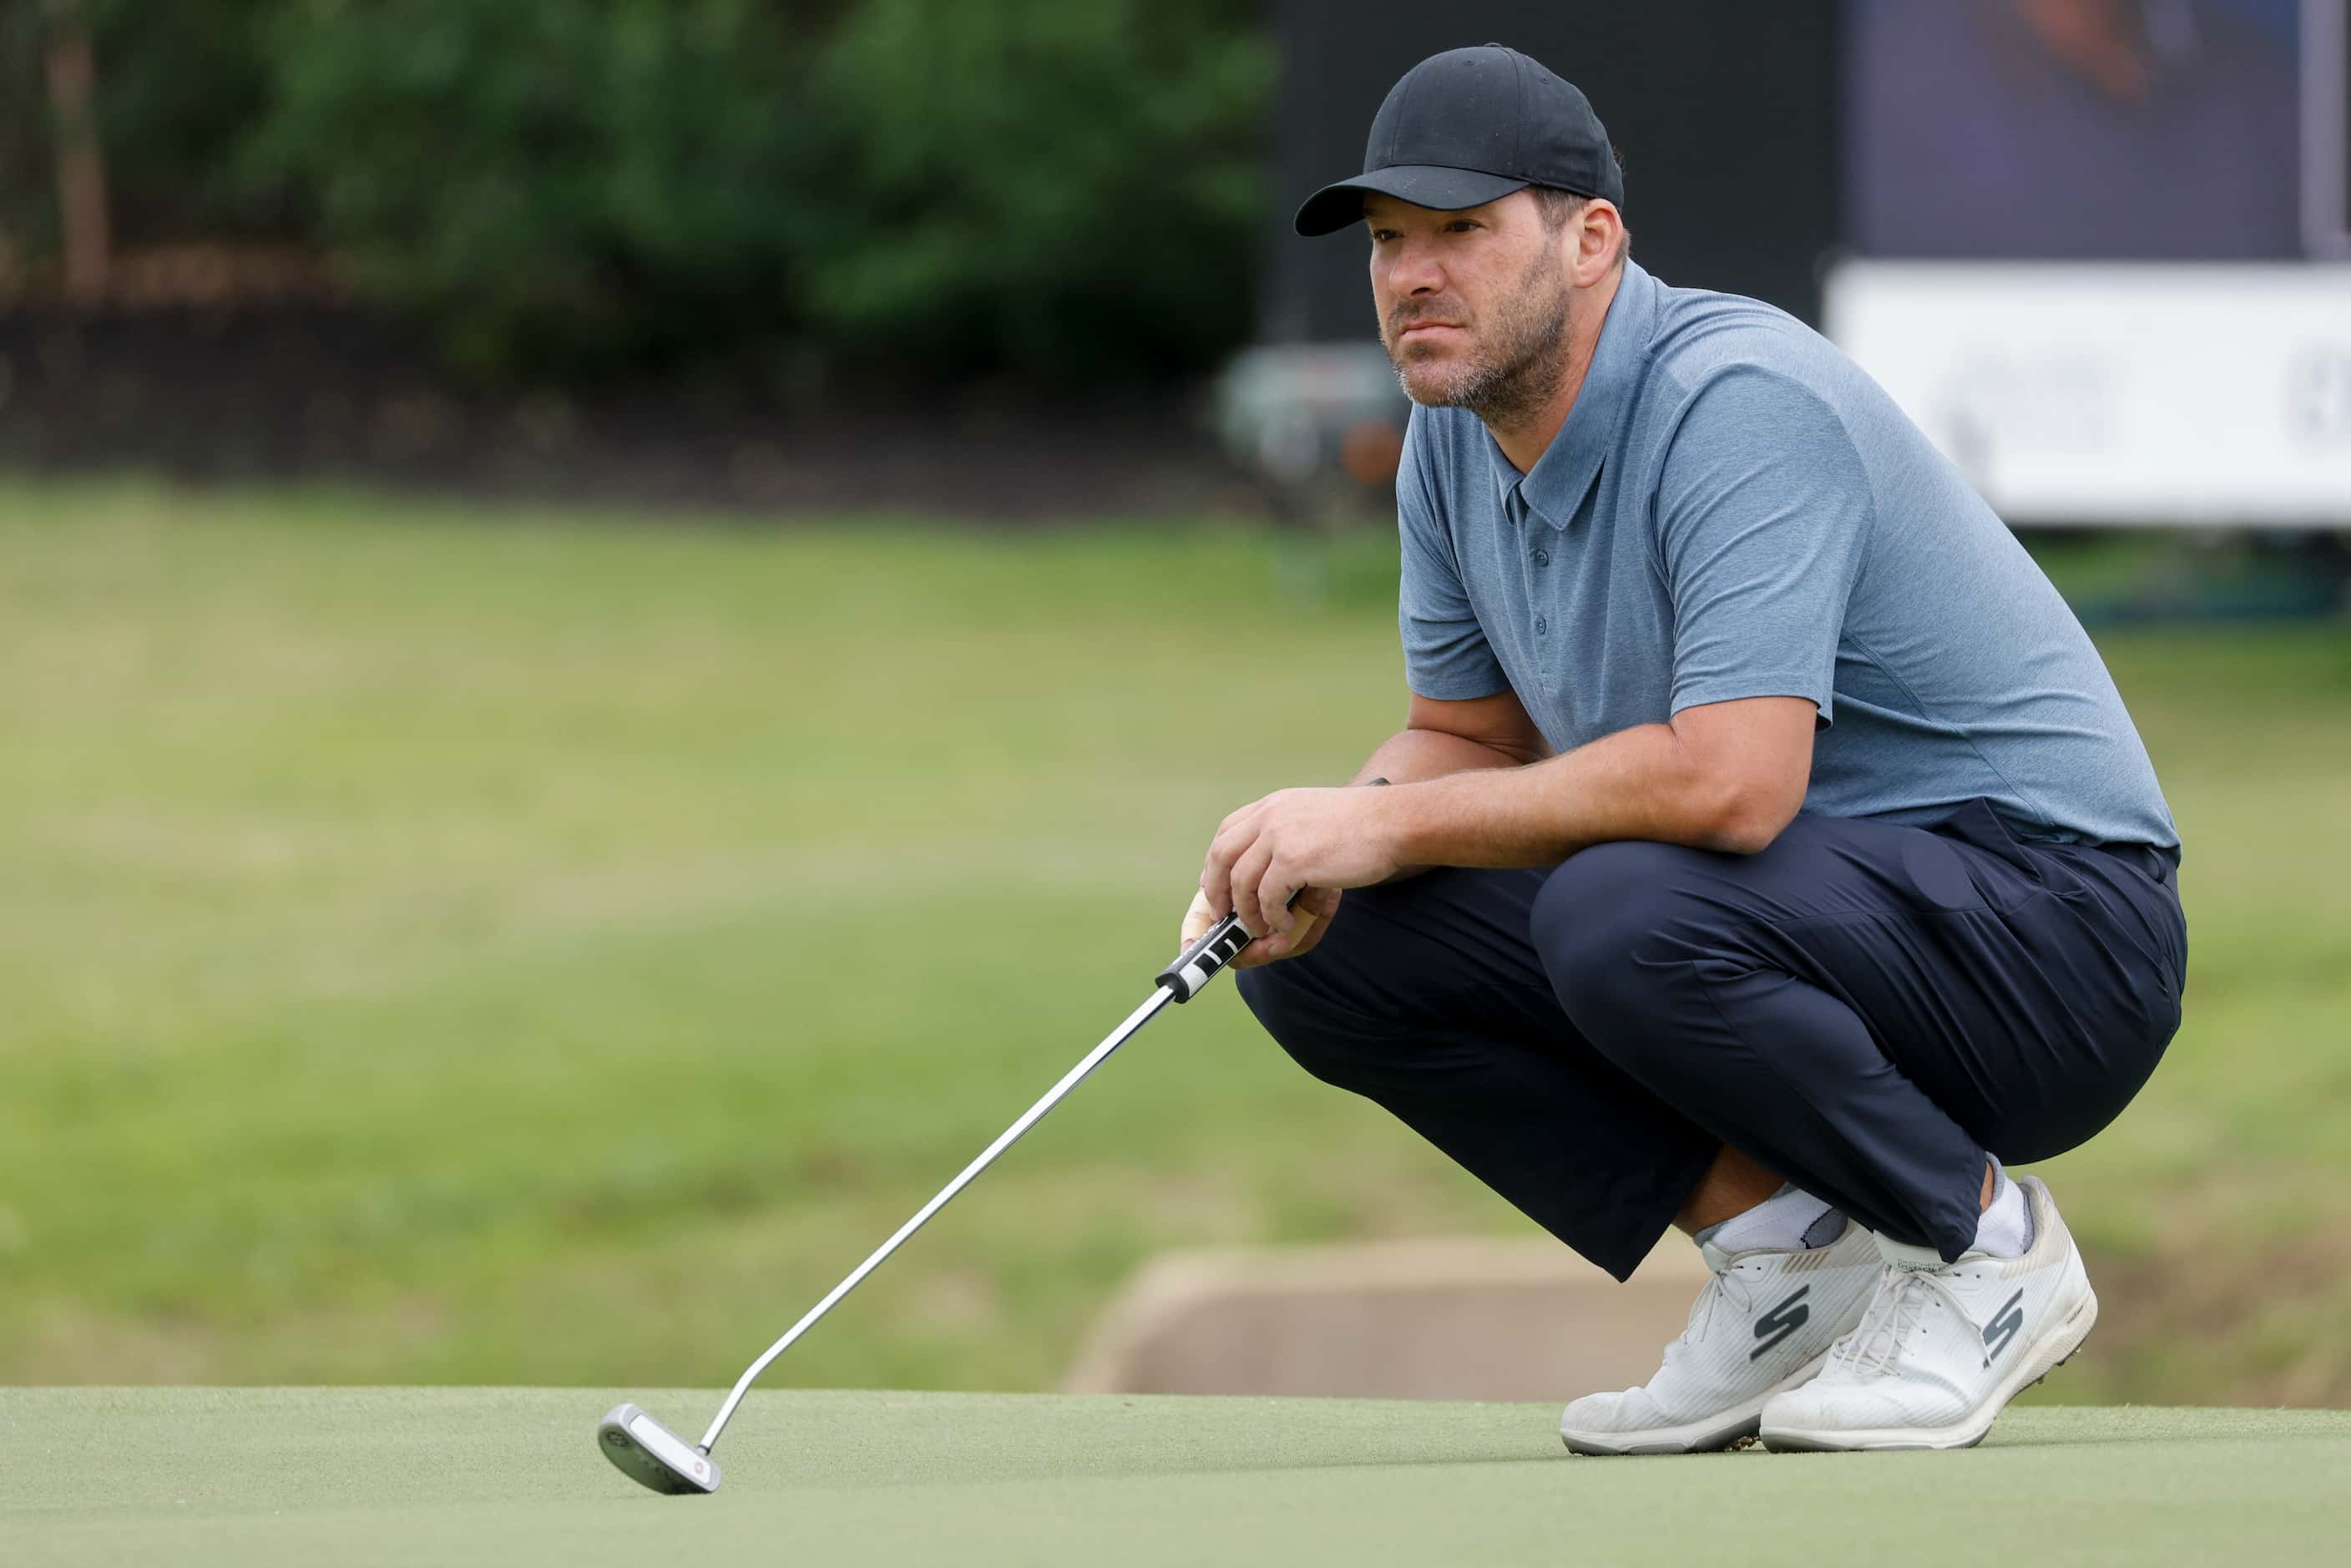 Former Dallas Cowboys quarterback Tony Romo waits to putt on the 17th green during the first...